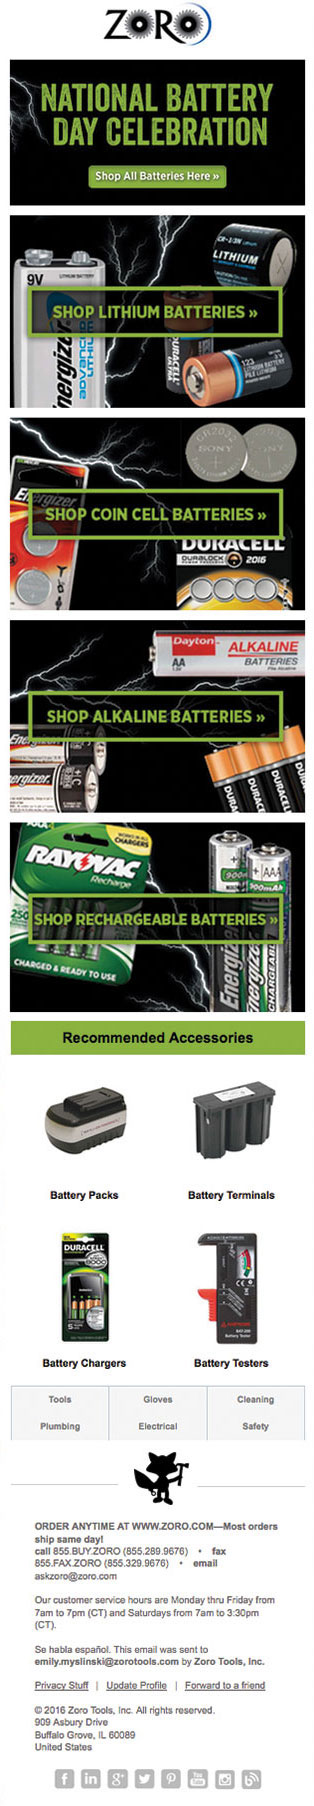 Email zoro Responsive Email Design battery batteries